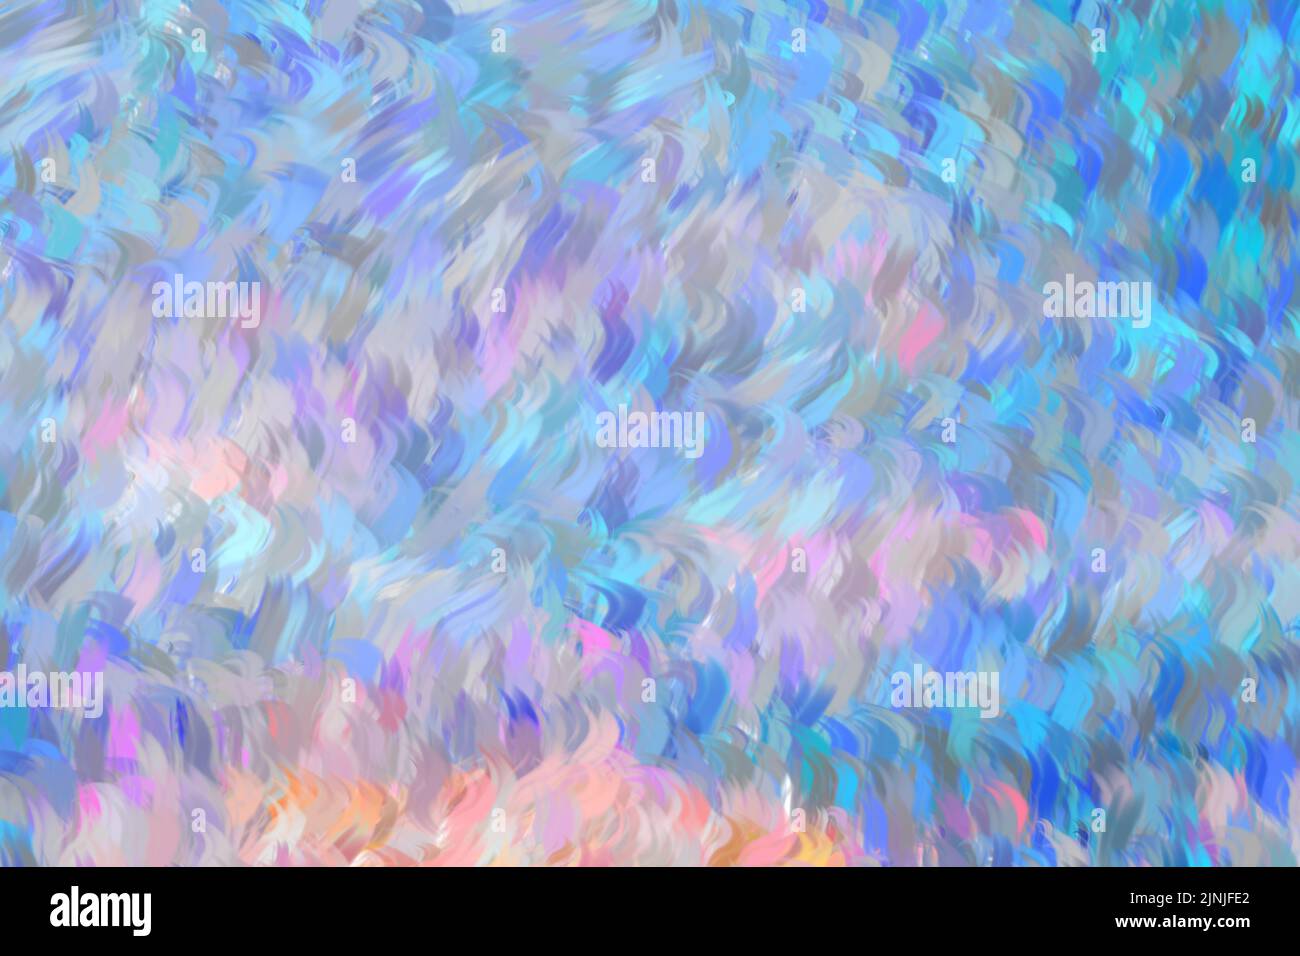 Feathered brush strokes in impressionist pastel colors. Painted in blue, aqua, turquoise, pink, gray, white, purple & peri in Van Gogh style. Stock Vector